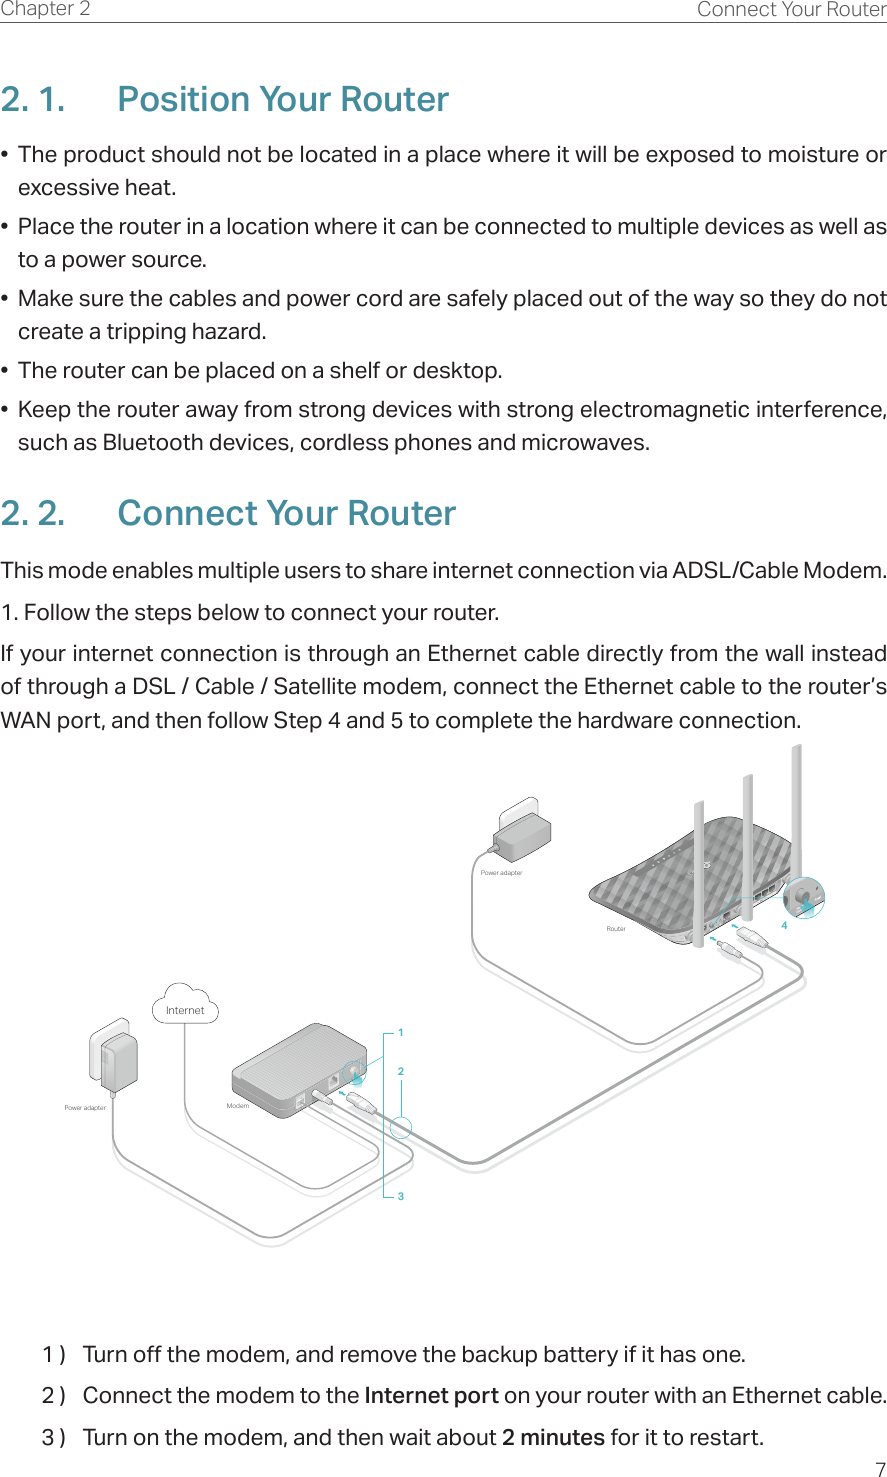 7Chapter 2 Connect Your Router2. 1.  Position Your Router•  The product should not be located in a place where it will be exposed to moisture or excessive heat.•  Place the router in a location where it can be connected to multiple devices as well as to a power source.•  Make sure the cables and power cord are safely placed out of the way so they do not create a tripping hazard.•  The router can be placed on a shelf or desktop.•  Keep the router away from strong devices with strong electromagnetic interference, such as Bluetooth devices, cordless phones and microwaves.2. 2.  Connect Your RouterThis mode enables multiple users to share internet connection via ADSL/Cable Modem.1. Follow the steps below to connect your router.If your internet connection is through an Ethernet cable directly from the wall instead of through a DSL / Cable / Satellite modem, connect the Ethernet cable to the router’s WAN port, and then follow Step 4 and 5 to complete the hardware connection.RouterModemPower adapterPower adapterInternet41231 )  Turn off the modem, and remove the backup battery if it has one.2 )  Connect the modem to the Internet port on your router with an Ethernet cable.3 )  Turn on the modem, and then wait about 2 minutes for it to restart.